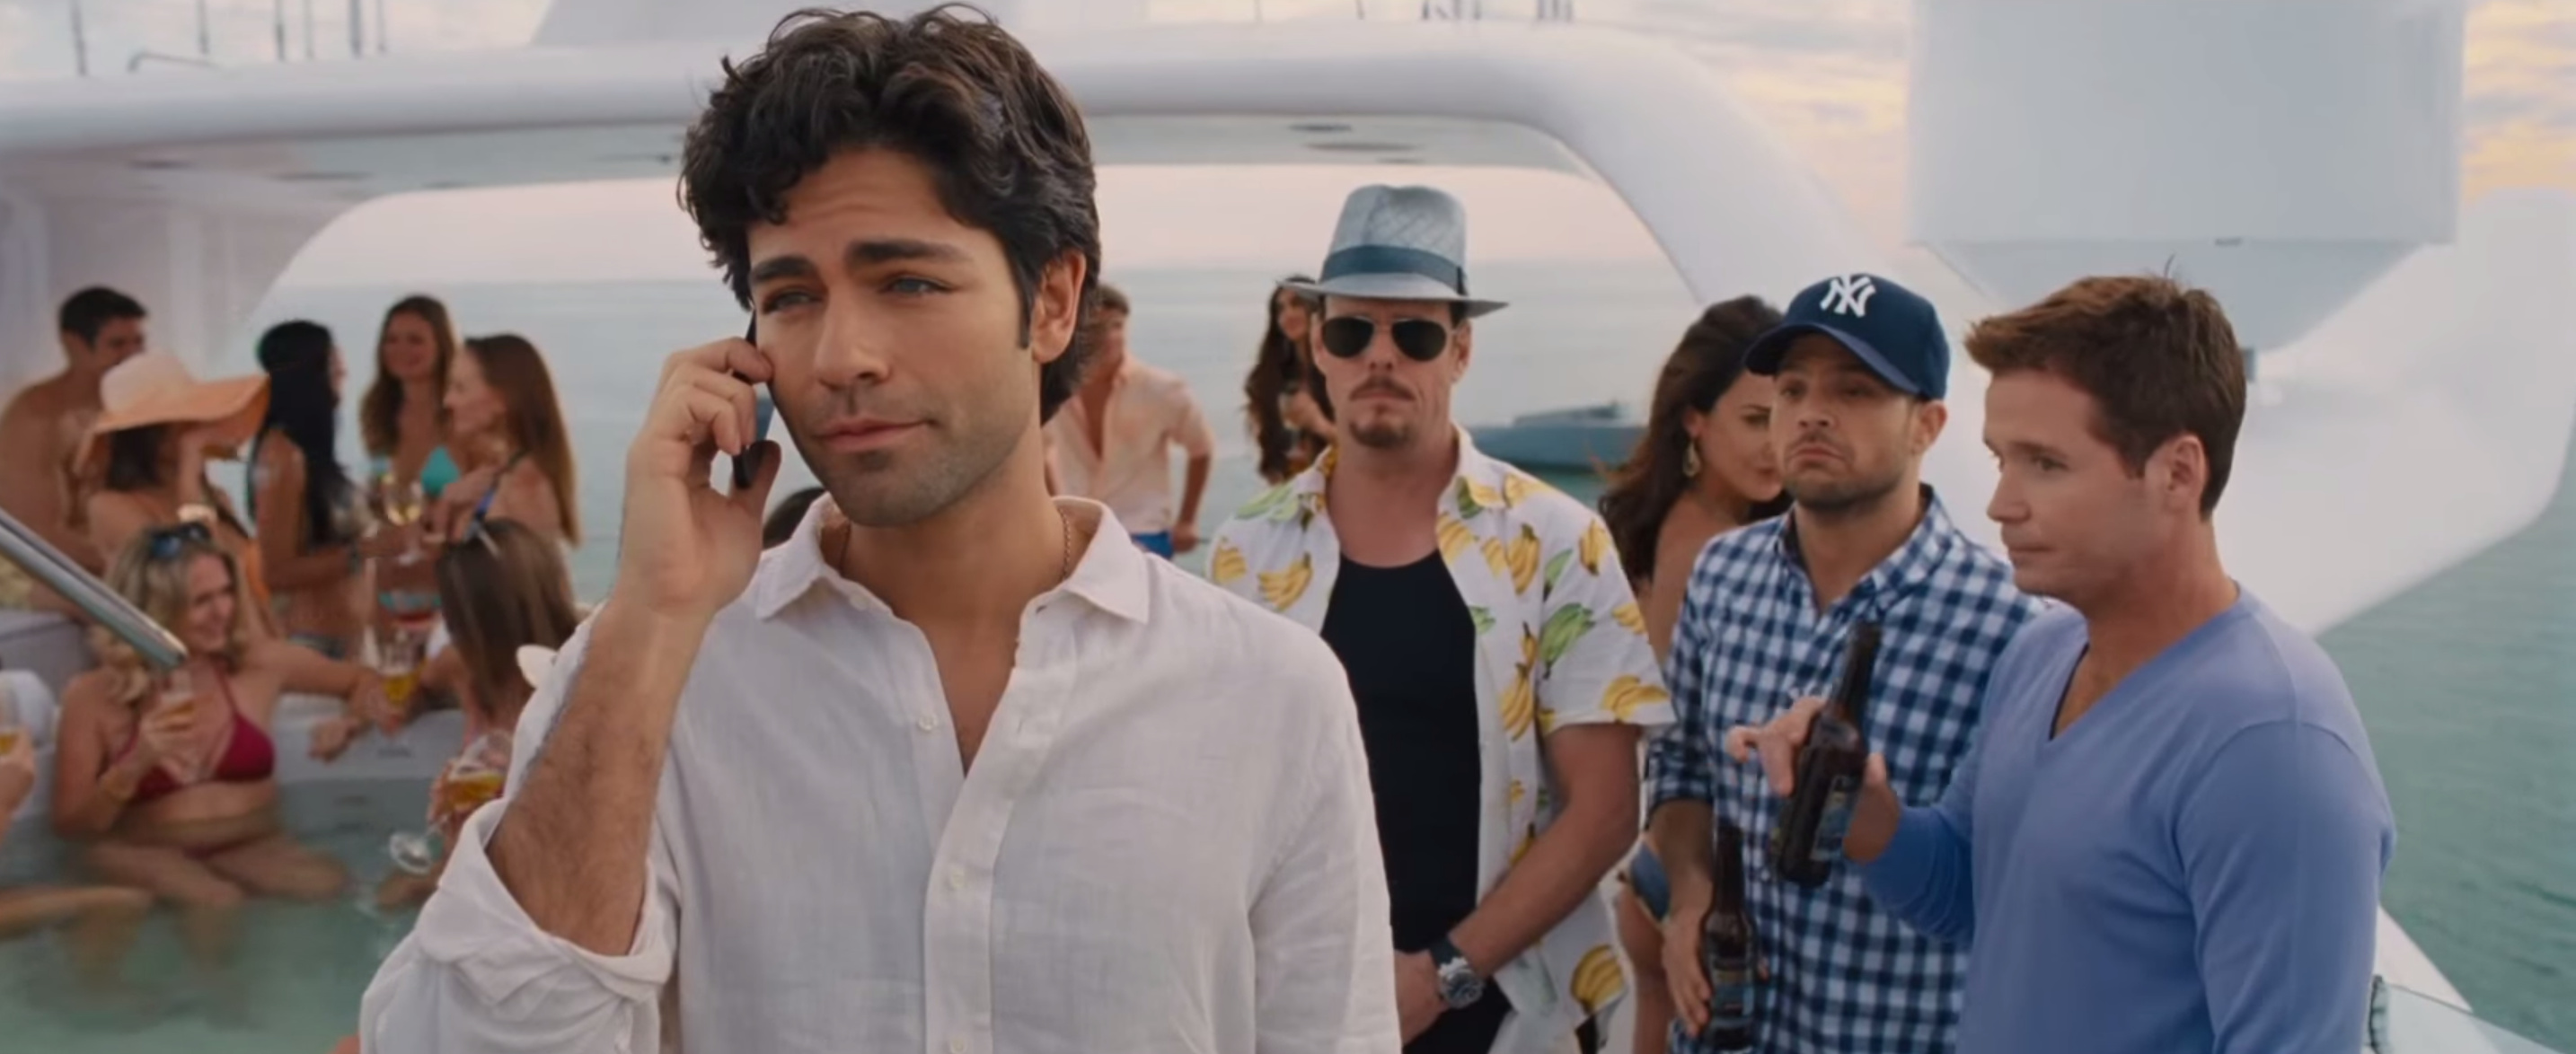 Entourage film trailer, Celebrity cameos, Rolling Stone feature, Excitement for the film, 2870x1180 Dual Screen Desktop